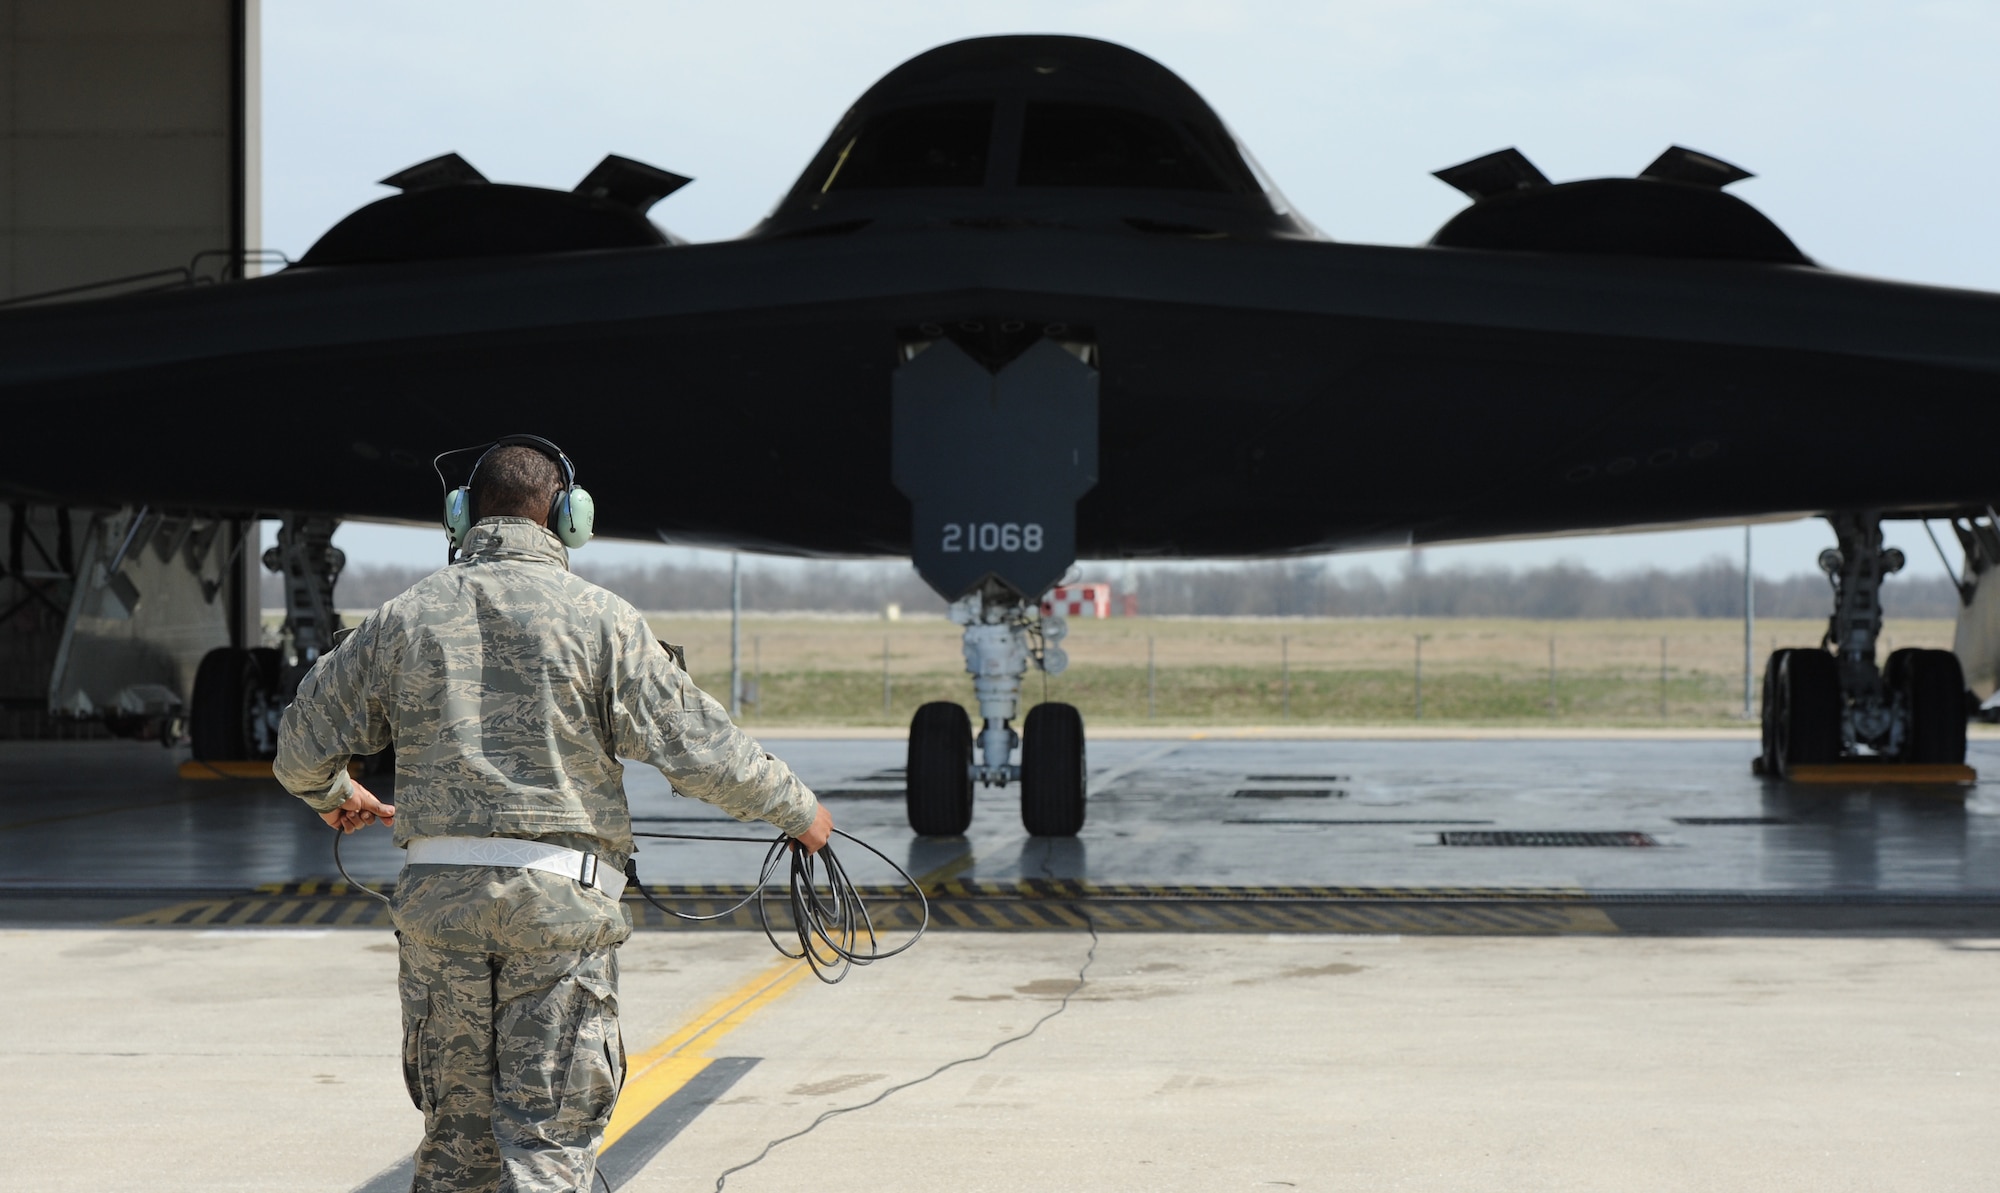 Airman 1st Class Steven McCray, 13th Aircraft Maintenance Unit B-2 Spirit crew chief, rolls up a communication cord after performing pre-flight checks at Whiteman Air Force Base, April 5, 2013.  Because of their mission and constant operations tempo, B-2 crew chiefs must remain alert and aware of every maintenance issue involving their assigned aircraft. (U.S. Air Force photo by Staff Sgt. Nick Wilson/Released)







